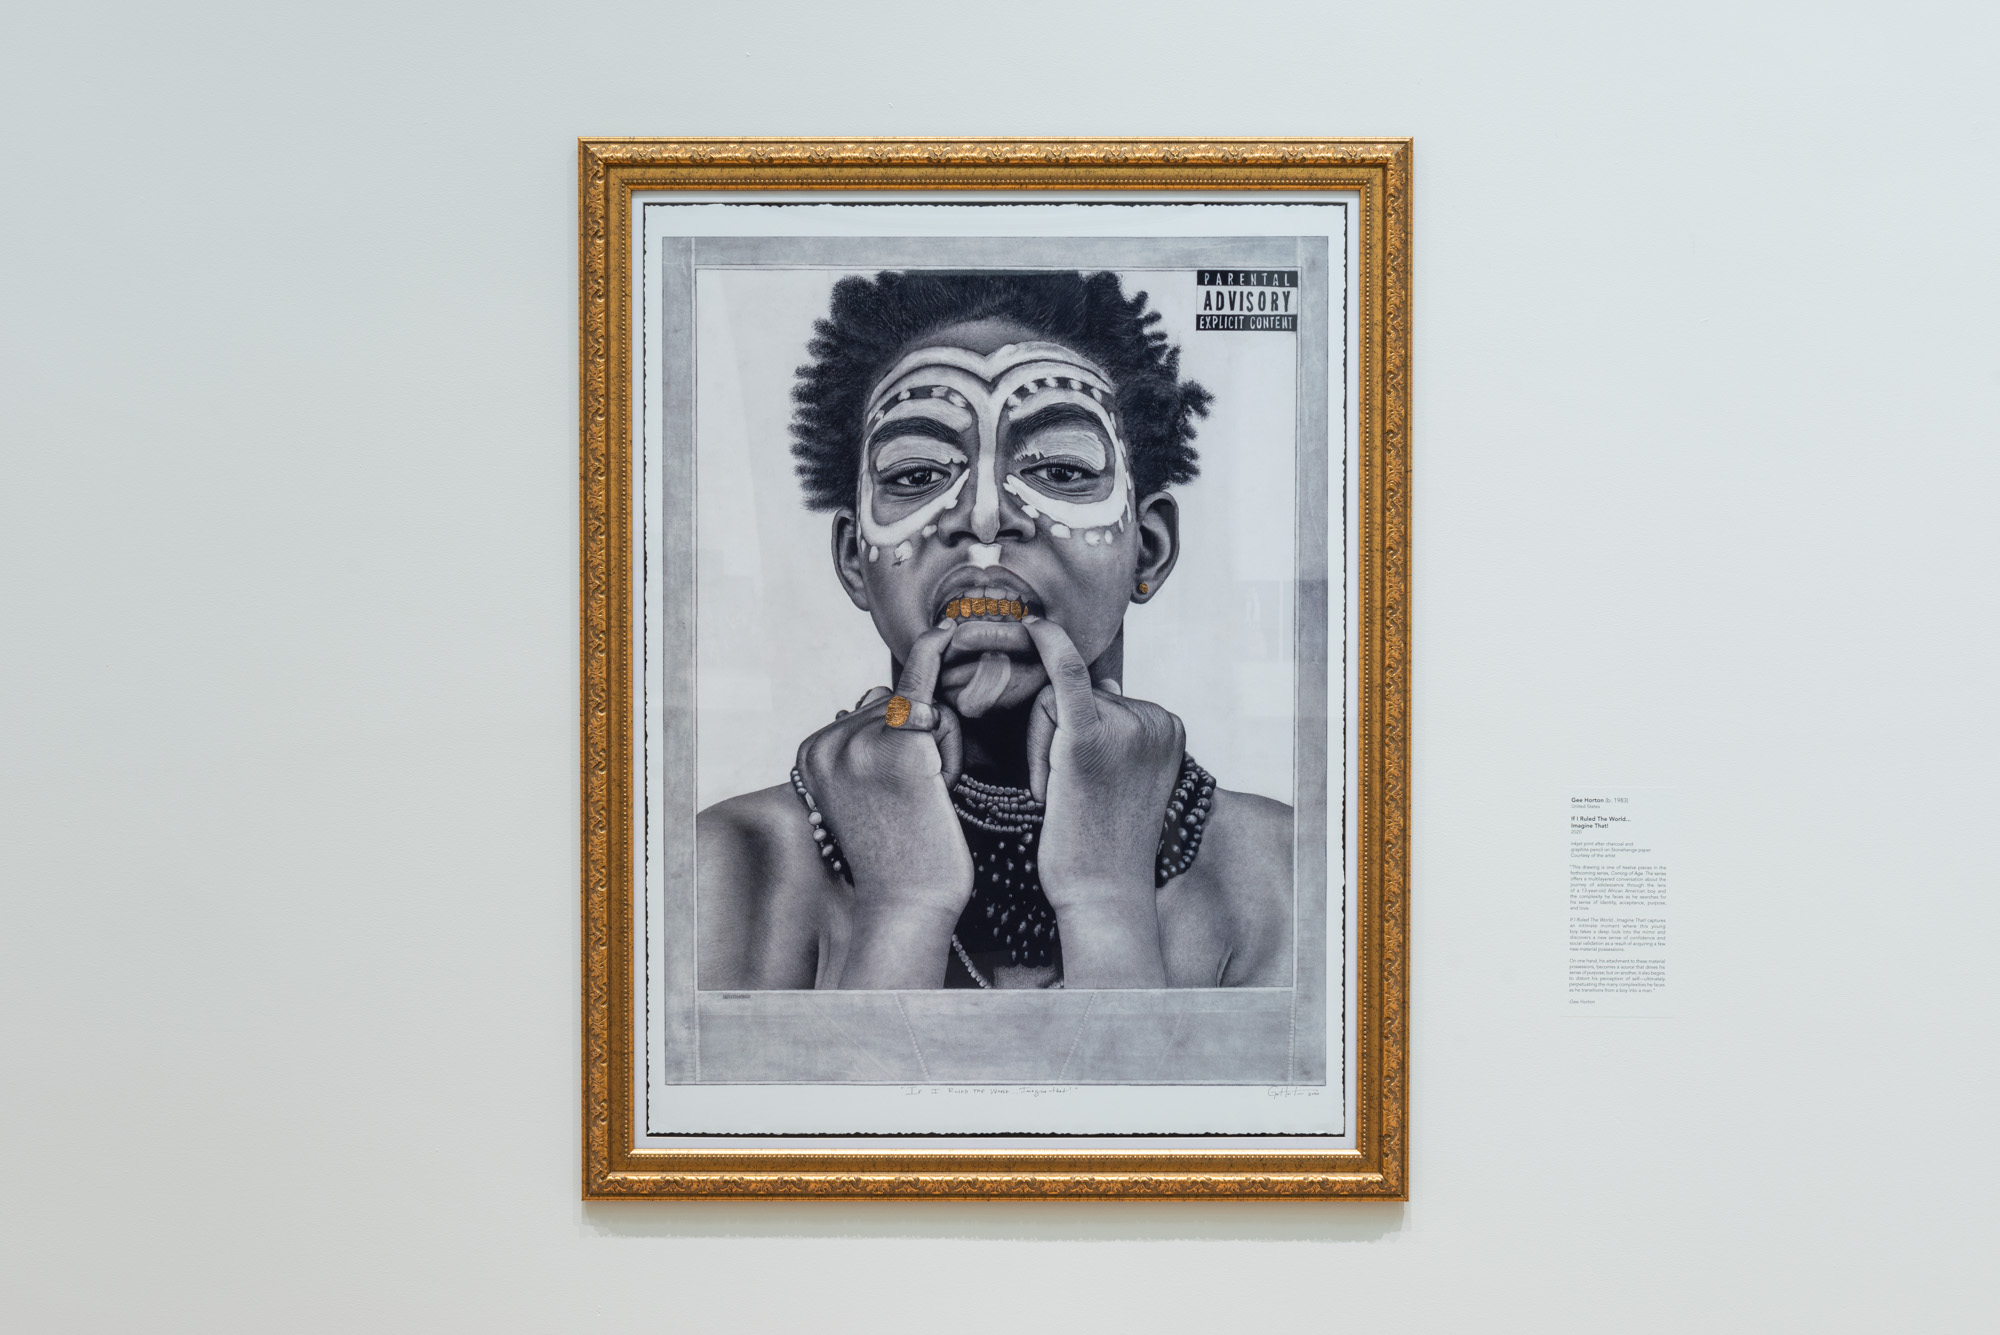 Gee Horton's If I Ruled The World...Imagine That!, a charcoal portrait of an African American man wearing traditional face paint, necklaces, and a gold pinky ring. The mad uses his two pinky fingers to pull his bottom lip down revealing a line of gold teeth. In the top right corner is a Parental Advisory sticker 